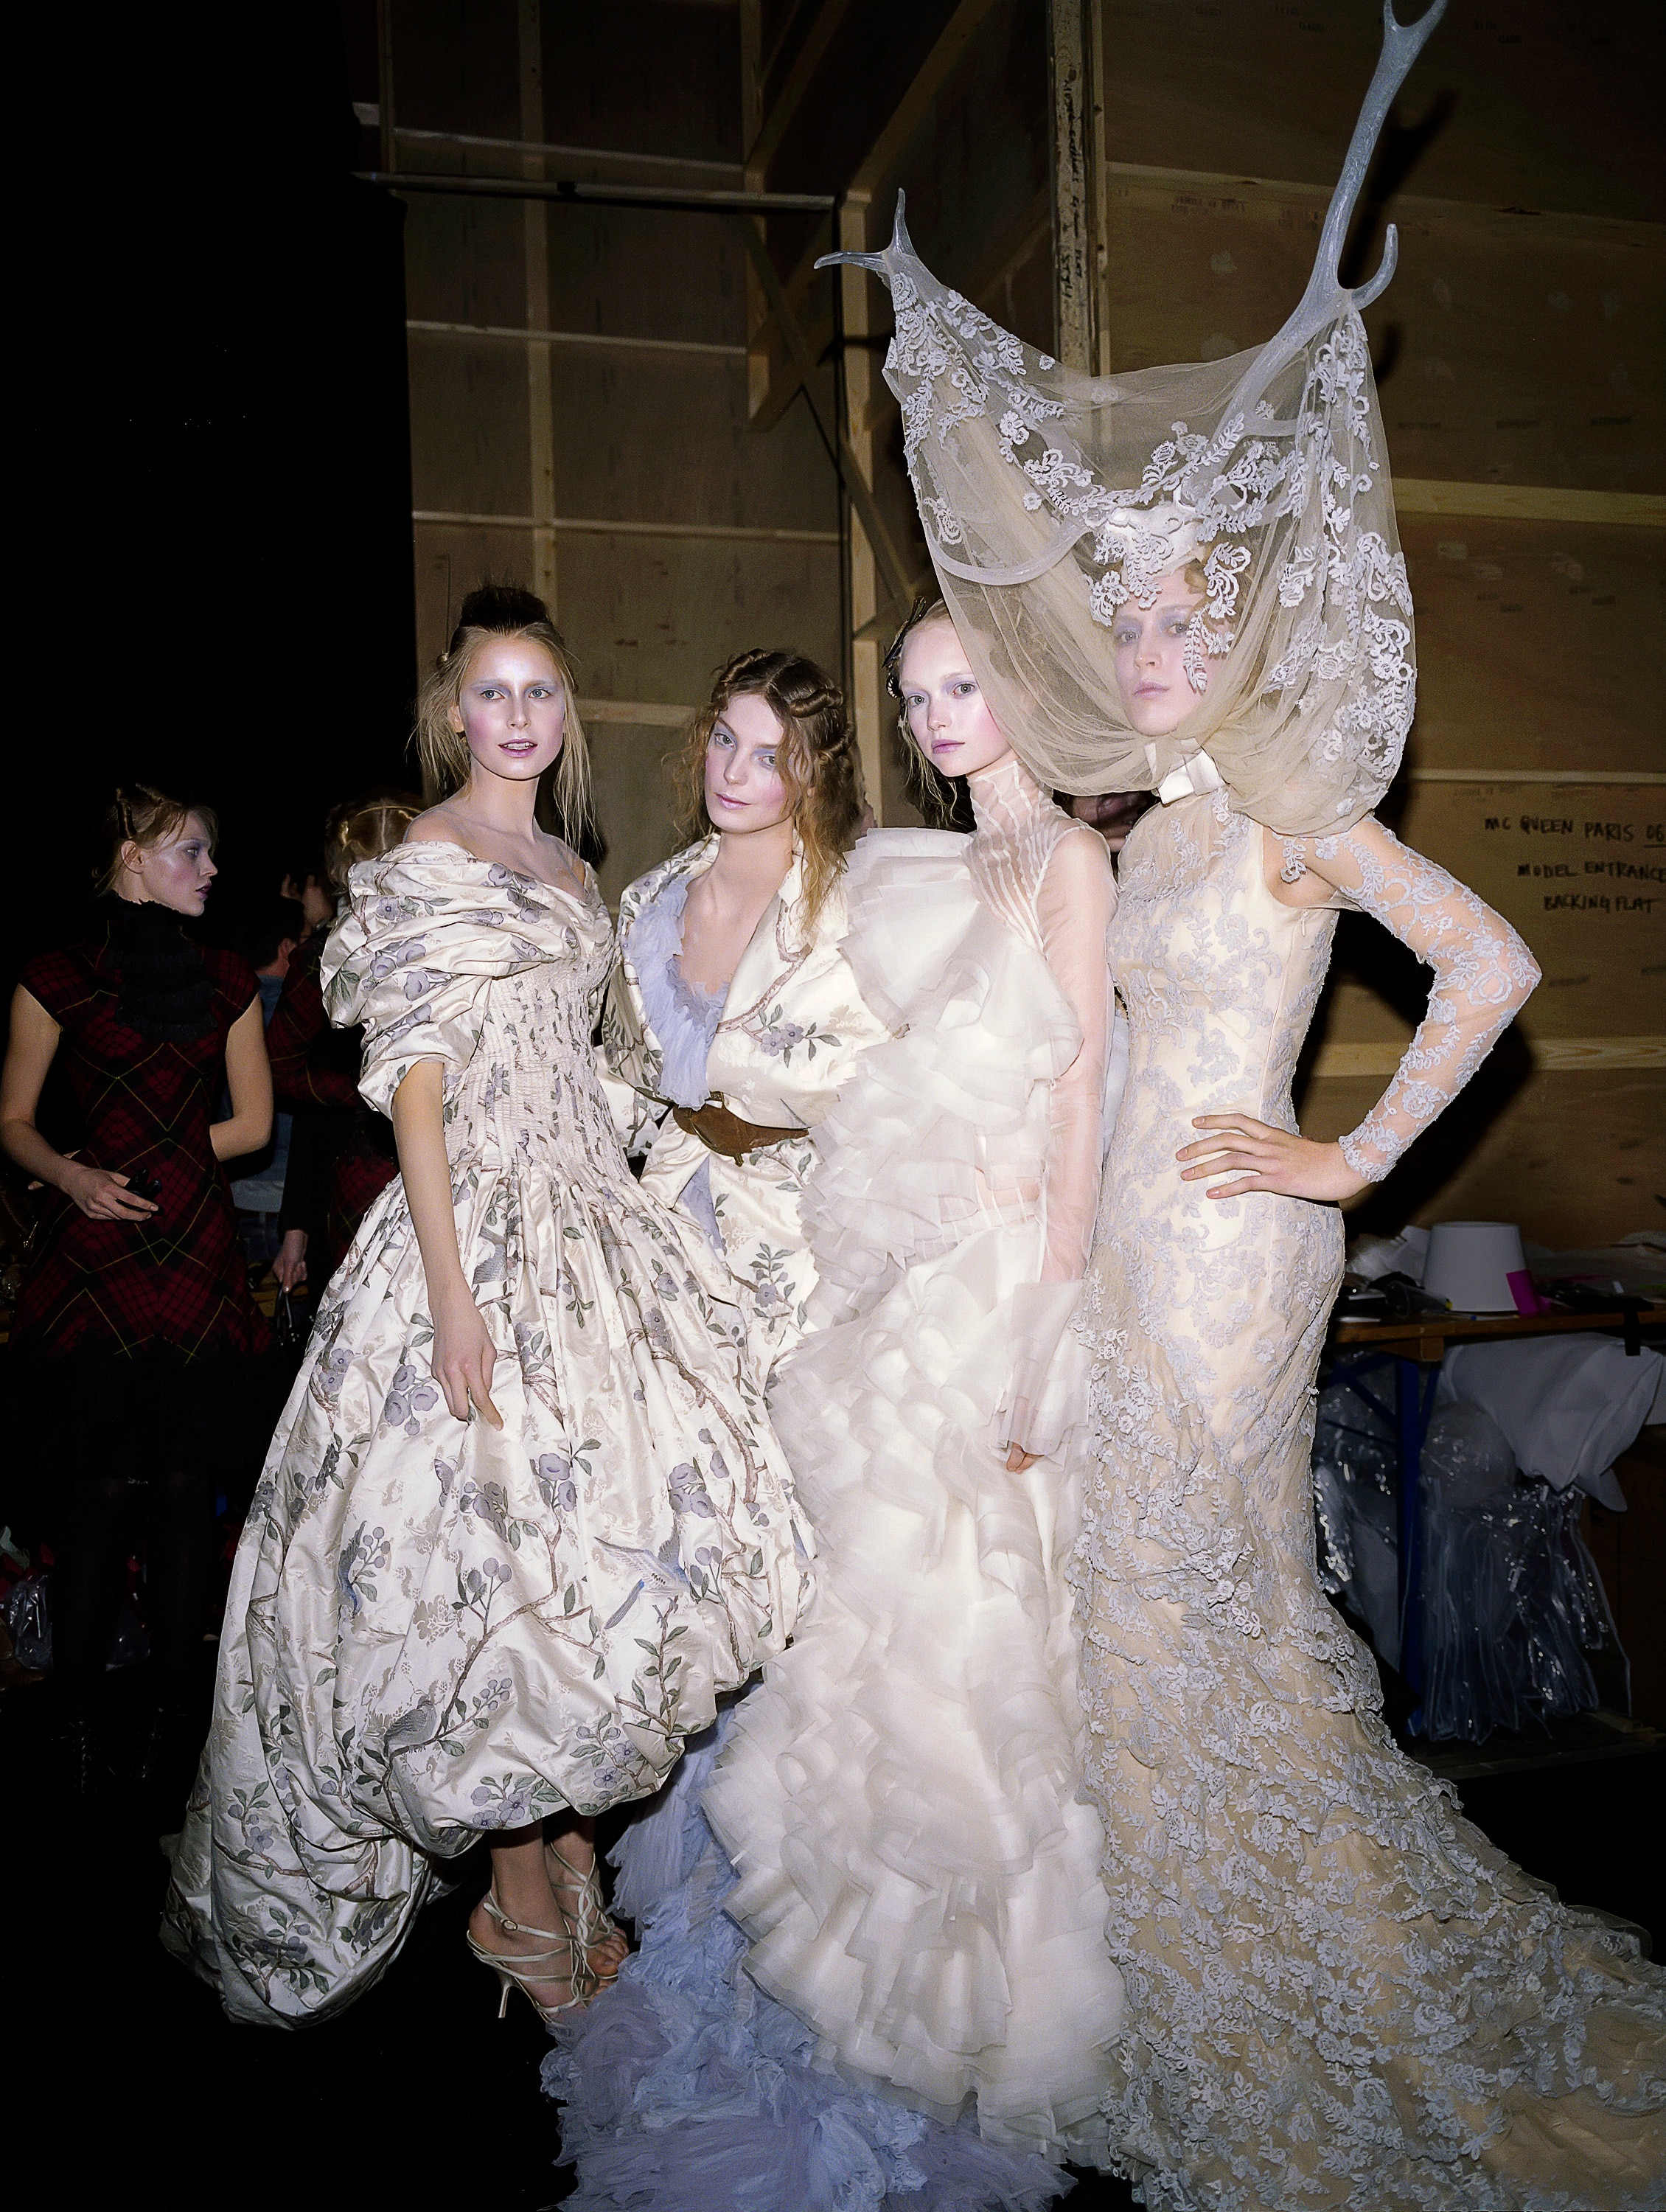 Four models pose backstage at a fashion show, all with white powdered faces and wearing extravagant white dresses